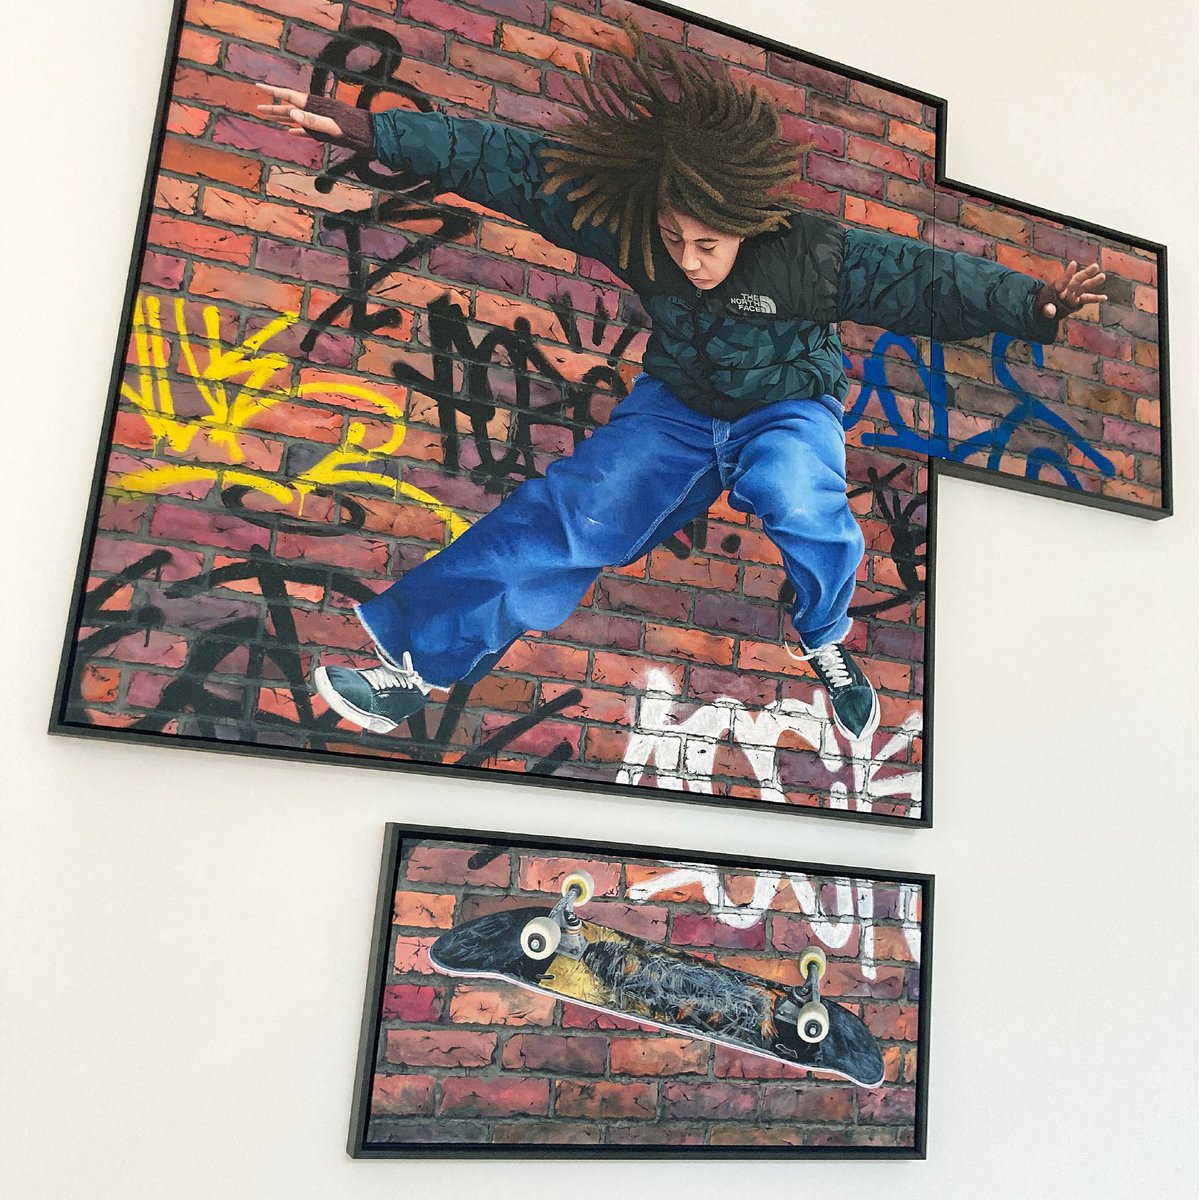 NEW PAINTING: Kickflip (triptych) 
140cm x 137cm. It’s of a #Manchester skater who’s performing a #kickflip manoeuvre, where the board is manipulated by his feet during a jump so that it spins sideways through 360 deg before landing. 🛹 #doakickflip #skateboarding #skateboardgb